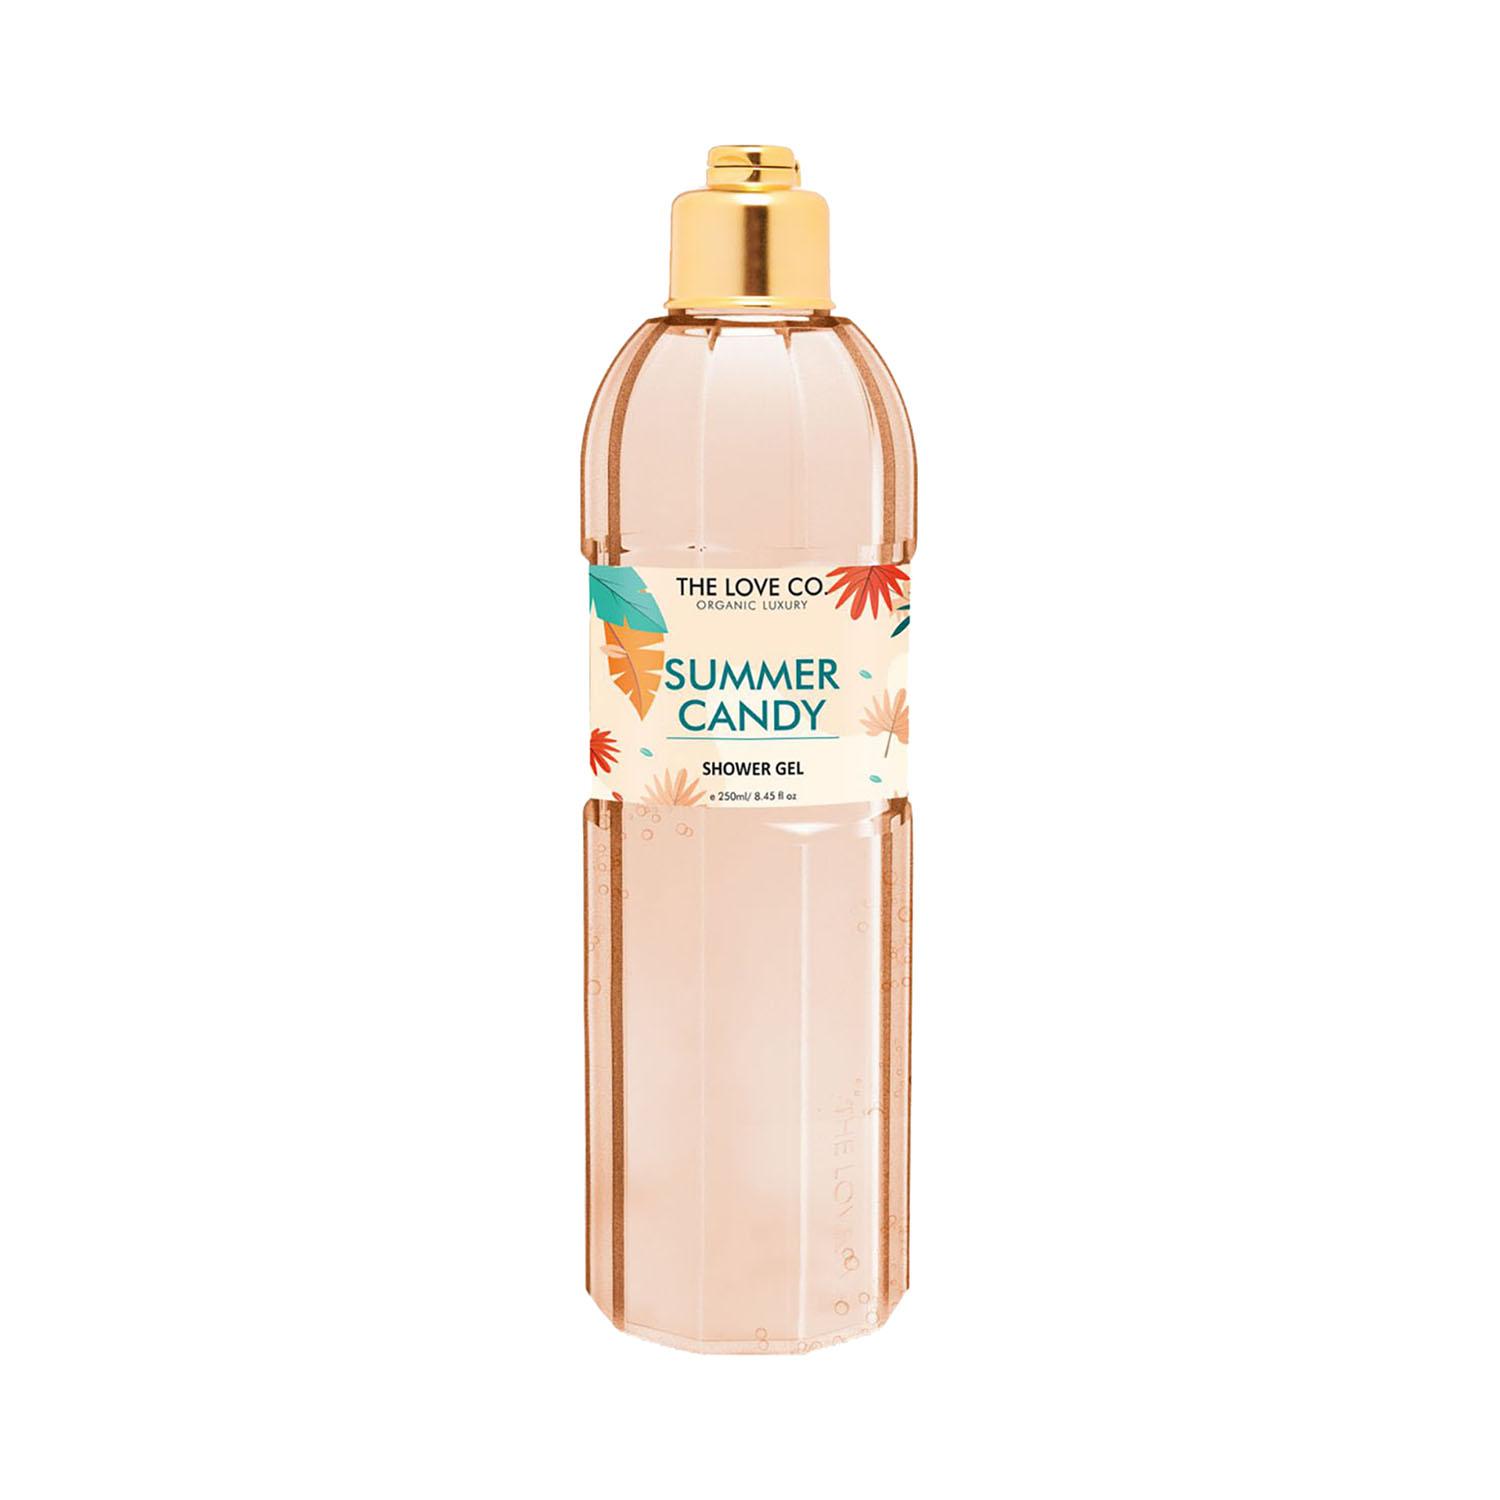 THE LOVE CO. | THE LOVE CO. Summer Candy Shower Gel (250ml)